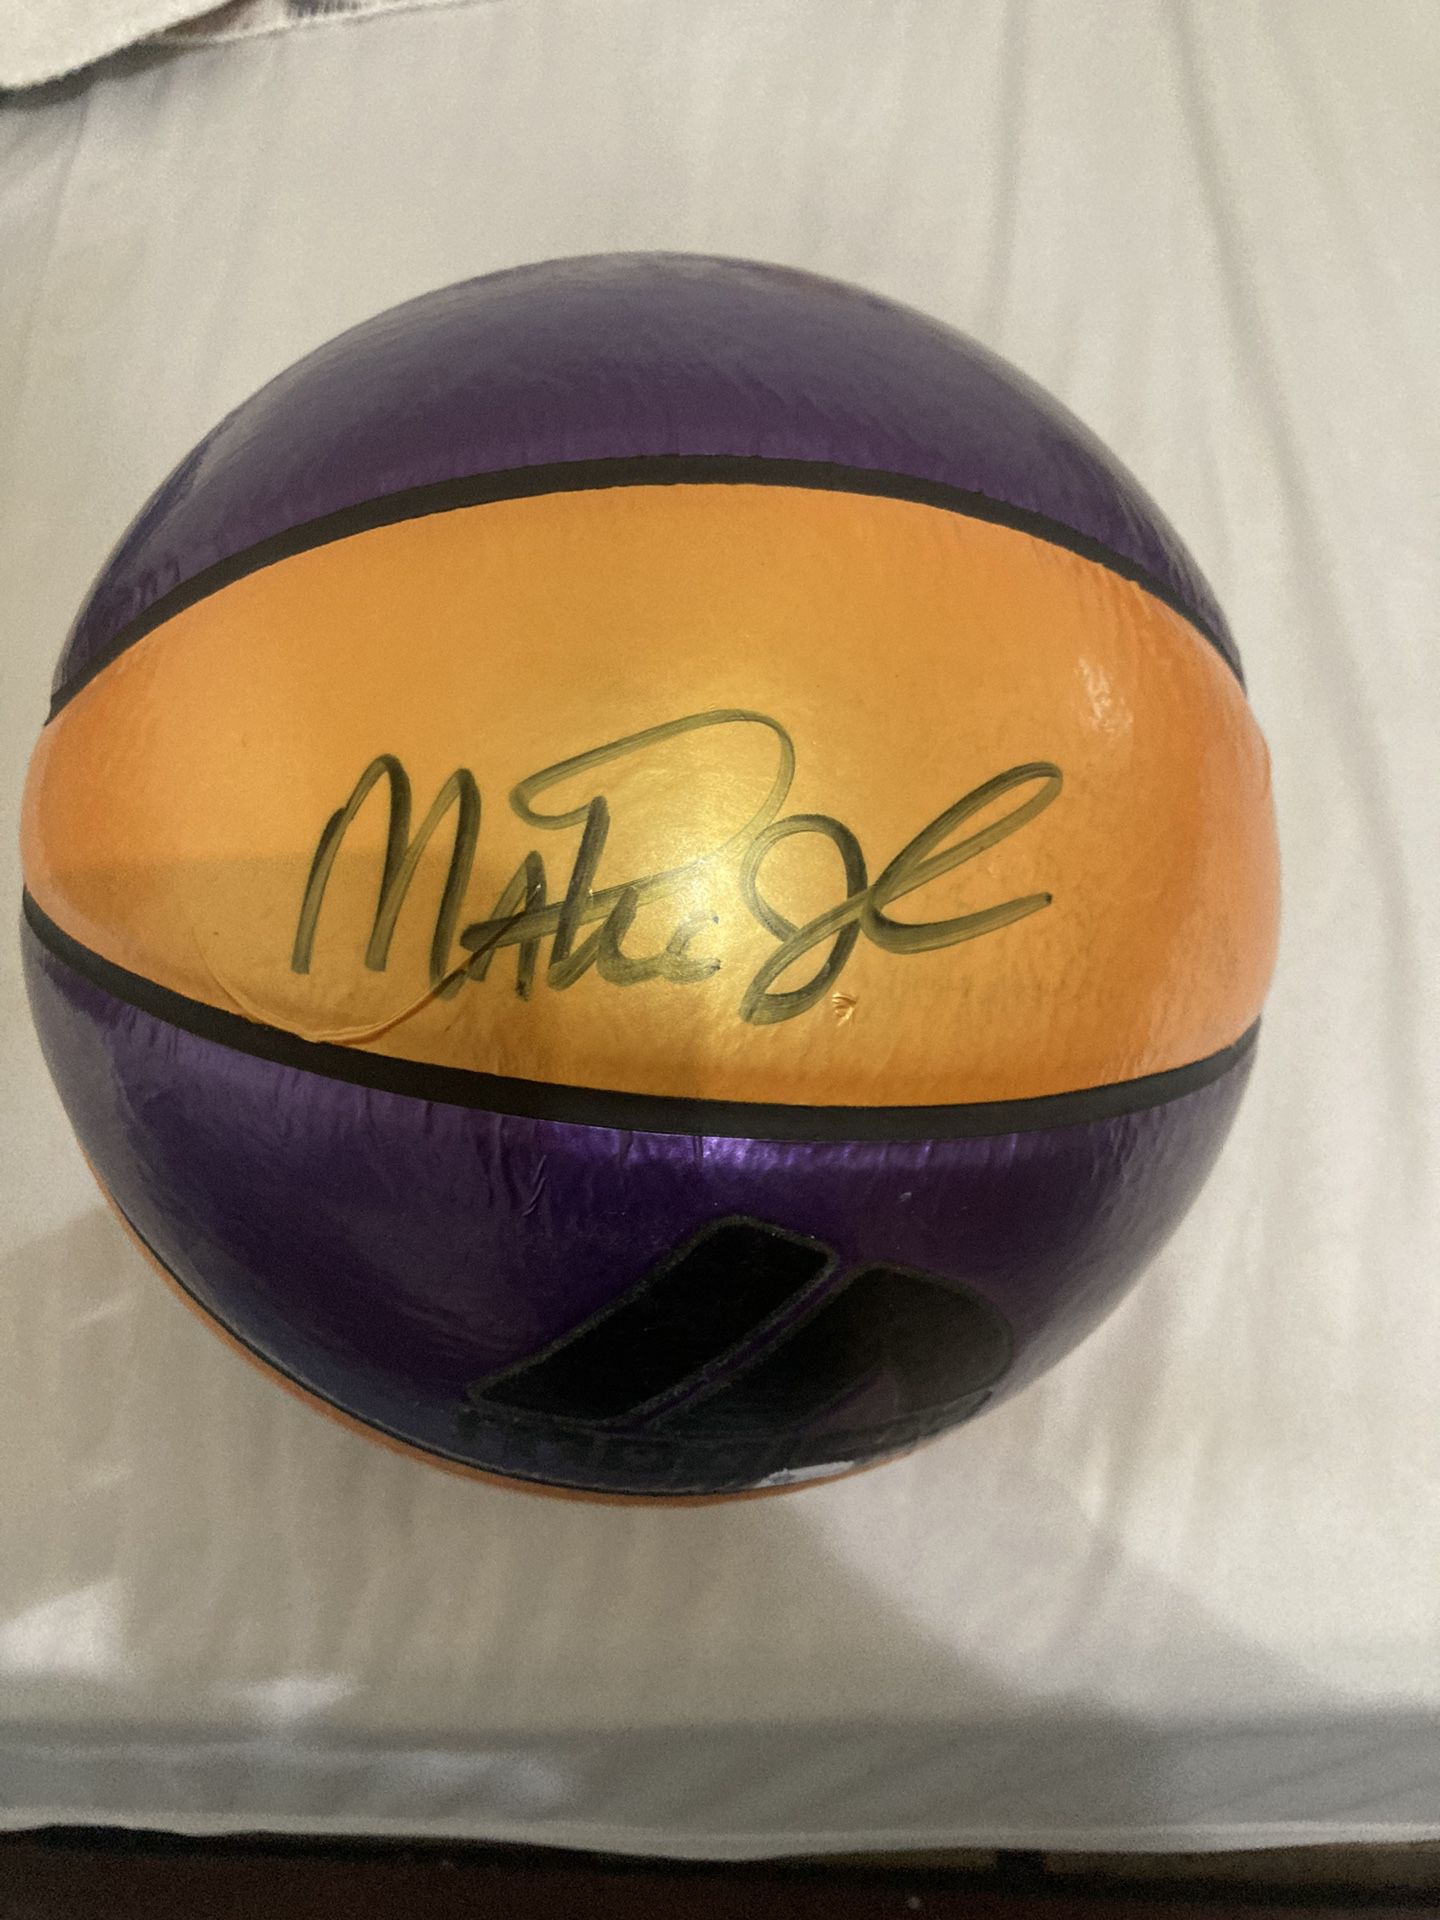 Ball Autographed By Magic Johnson